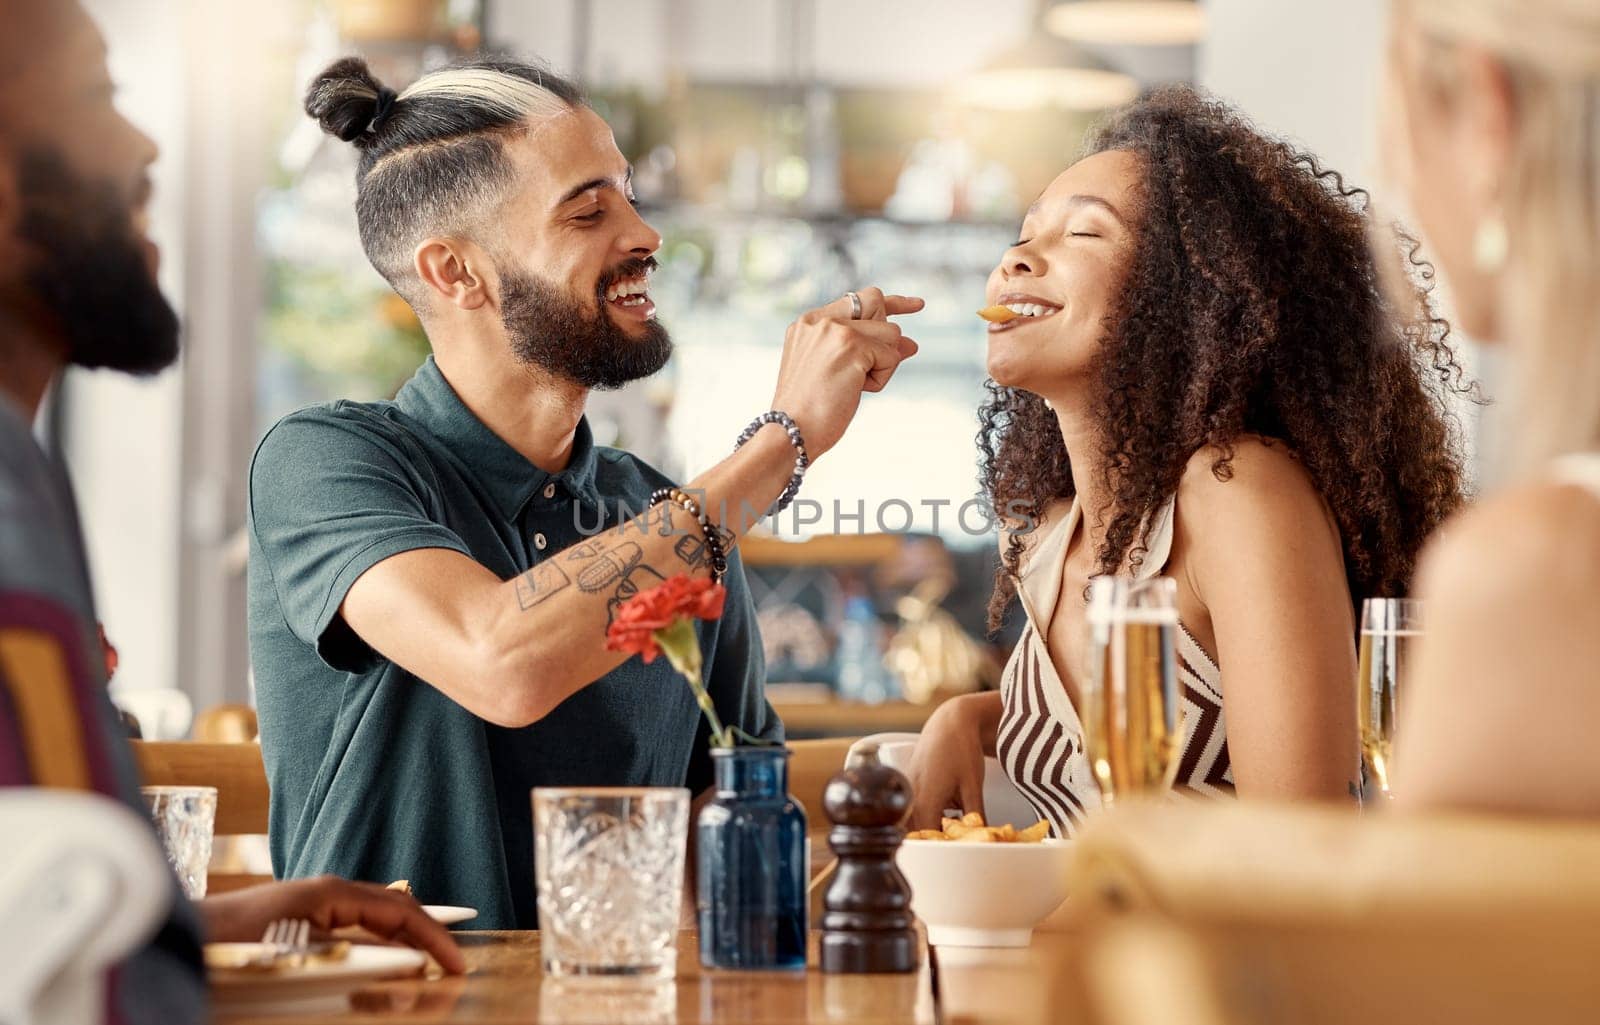 A taste of the good life. a young man feeding his girlfriend fries in a restuarant